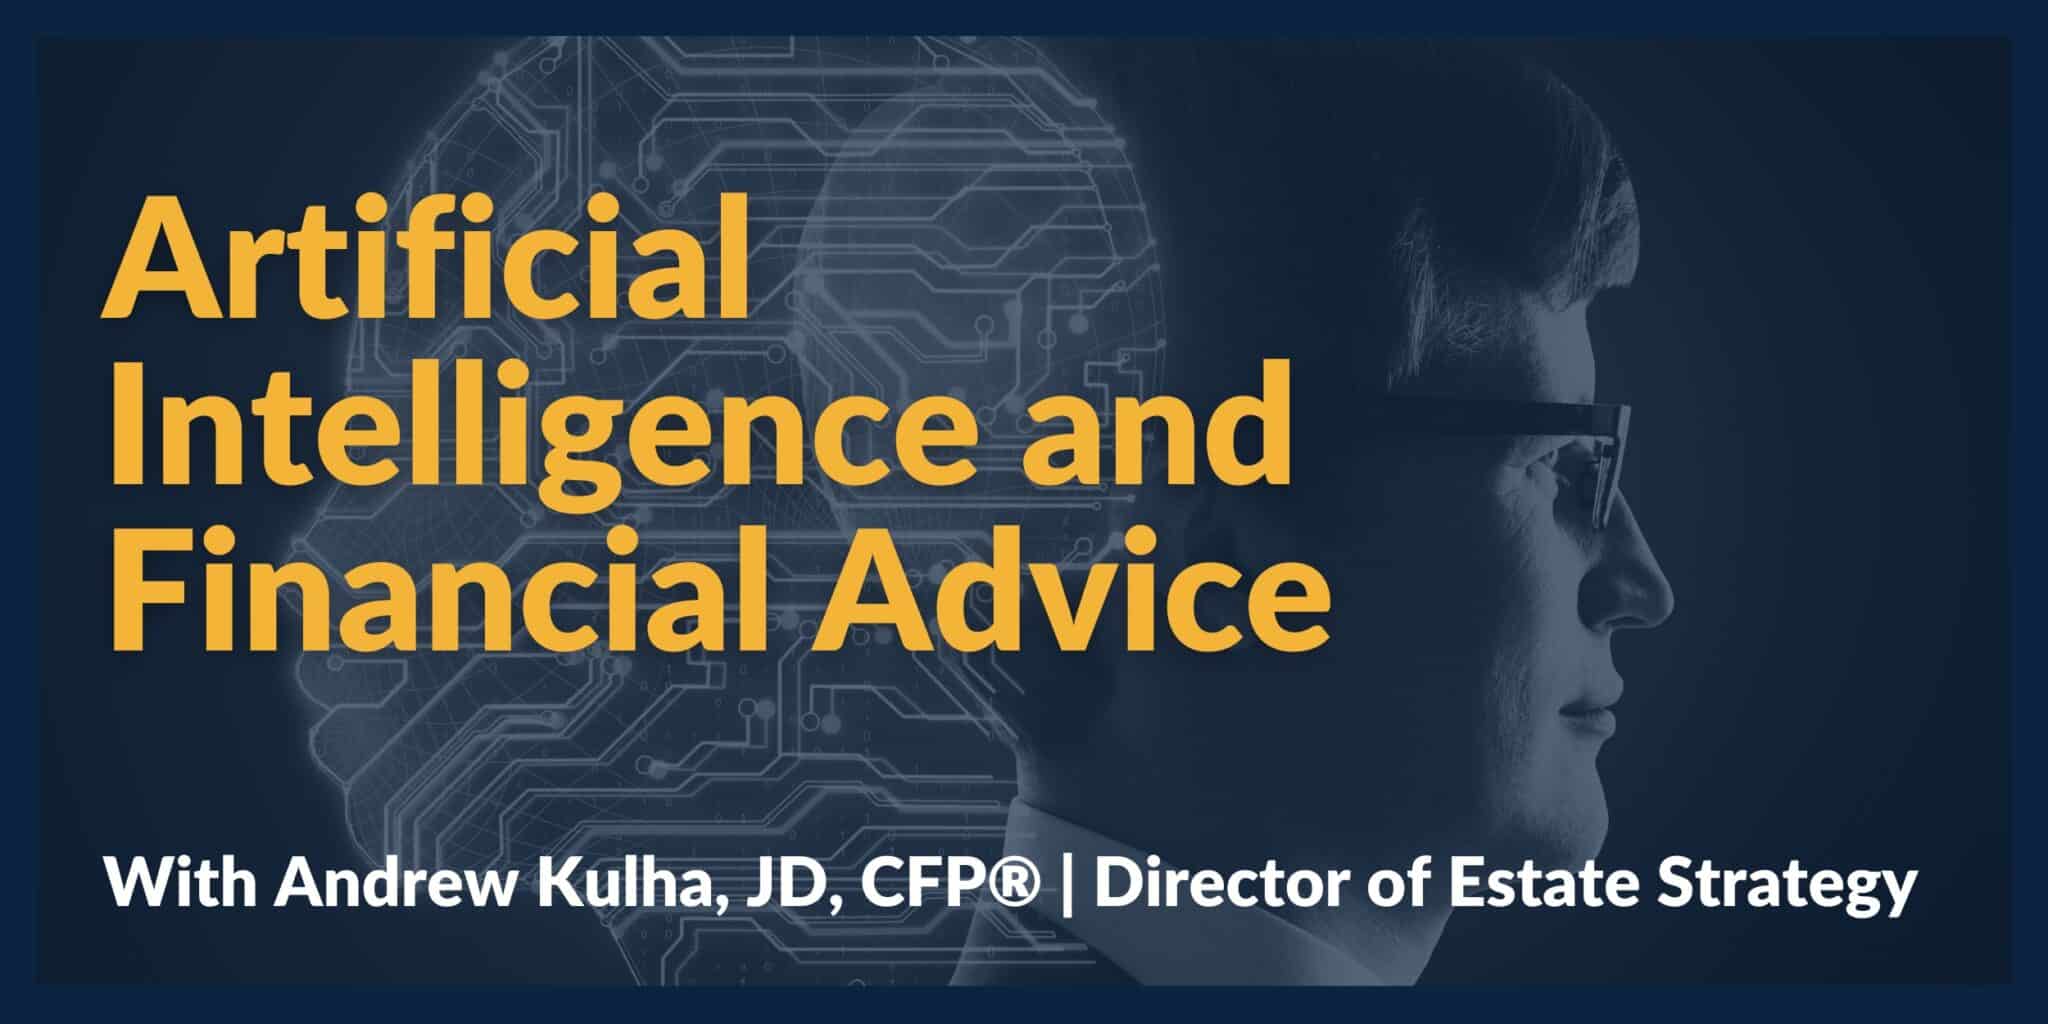 Can Artificial Intelligence and ChatGPT Replace the Value of Advisors